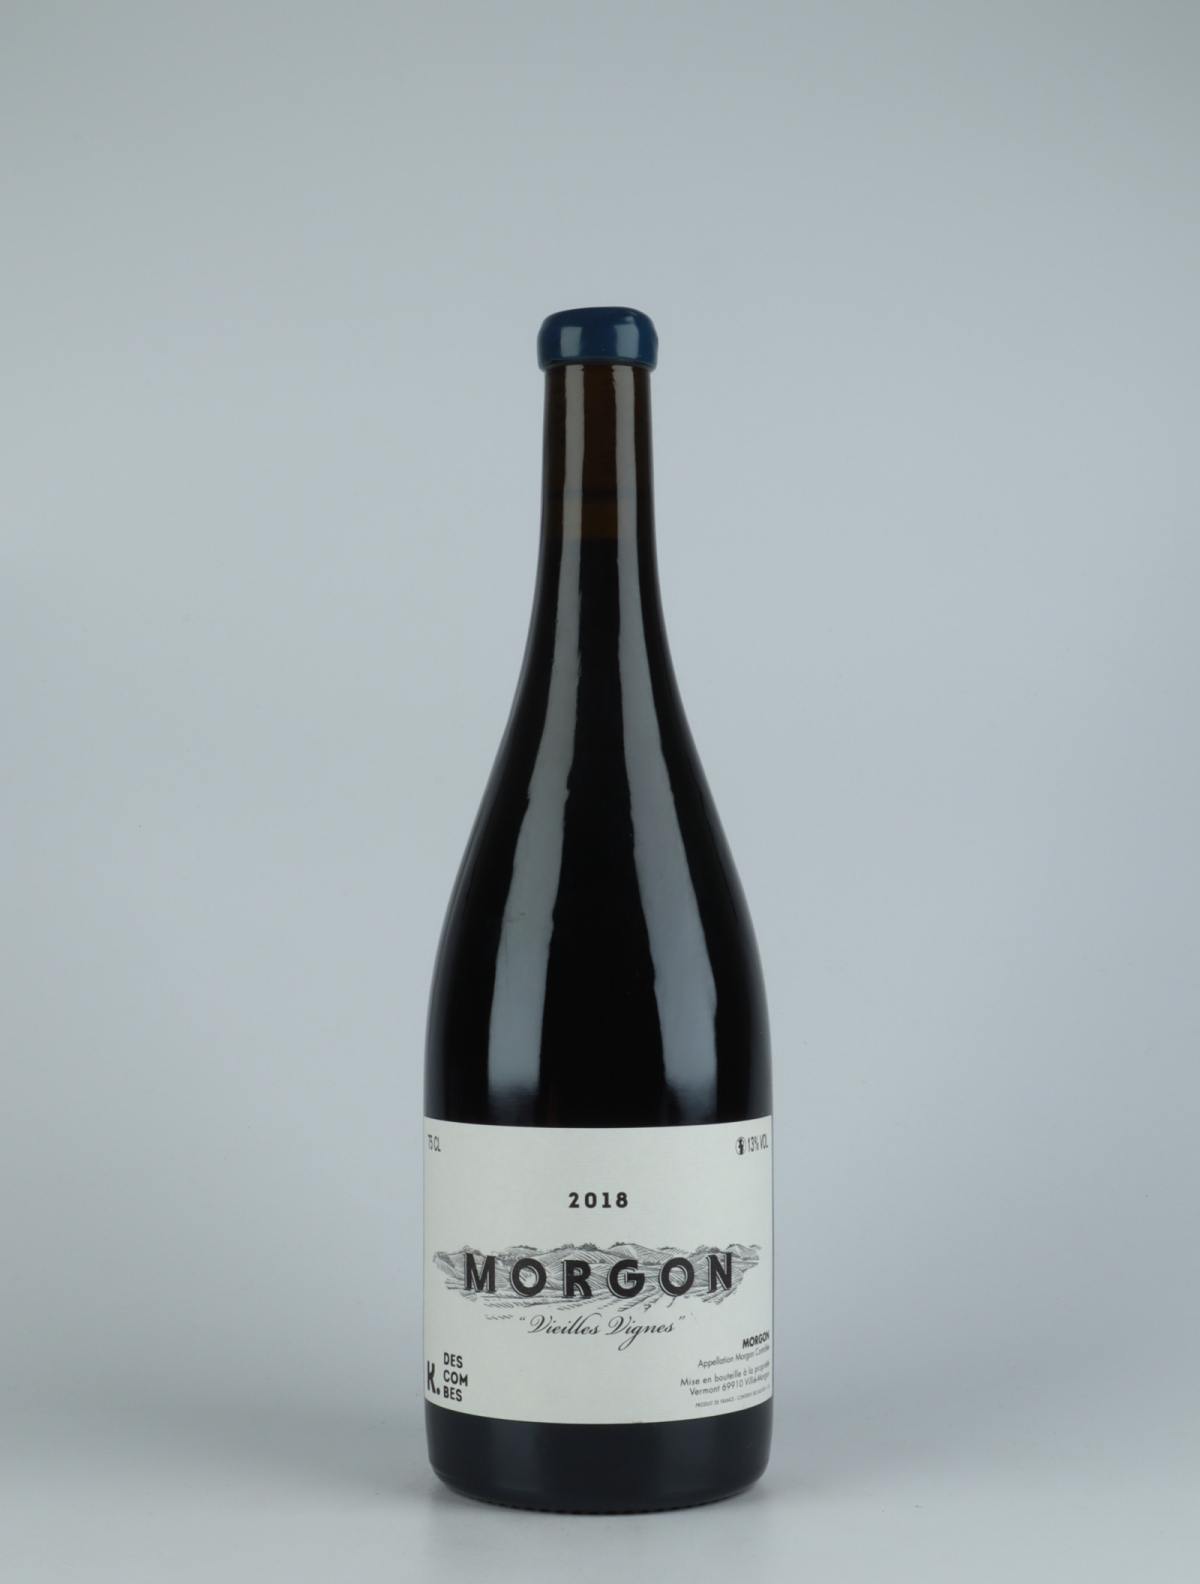 A bottle 2018 Morgon Vieilles Vignes Red wine from Kewin Descombes, Beaujolais in France